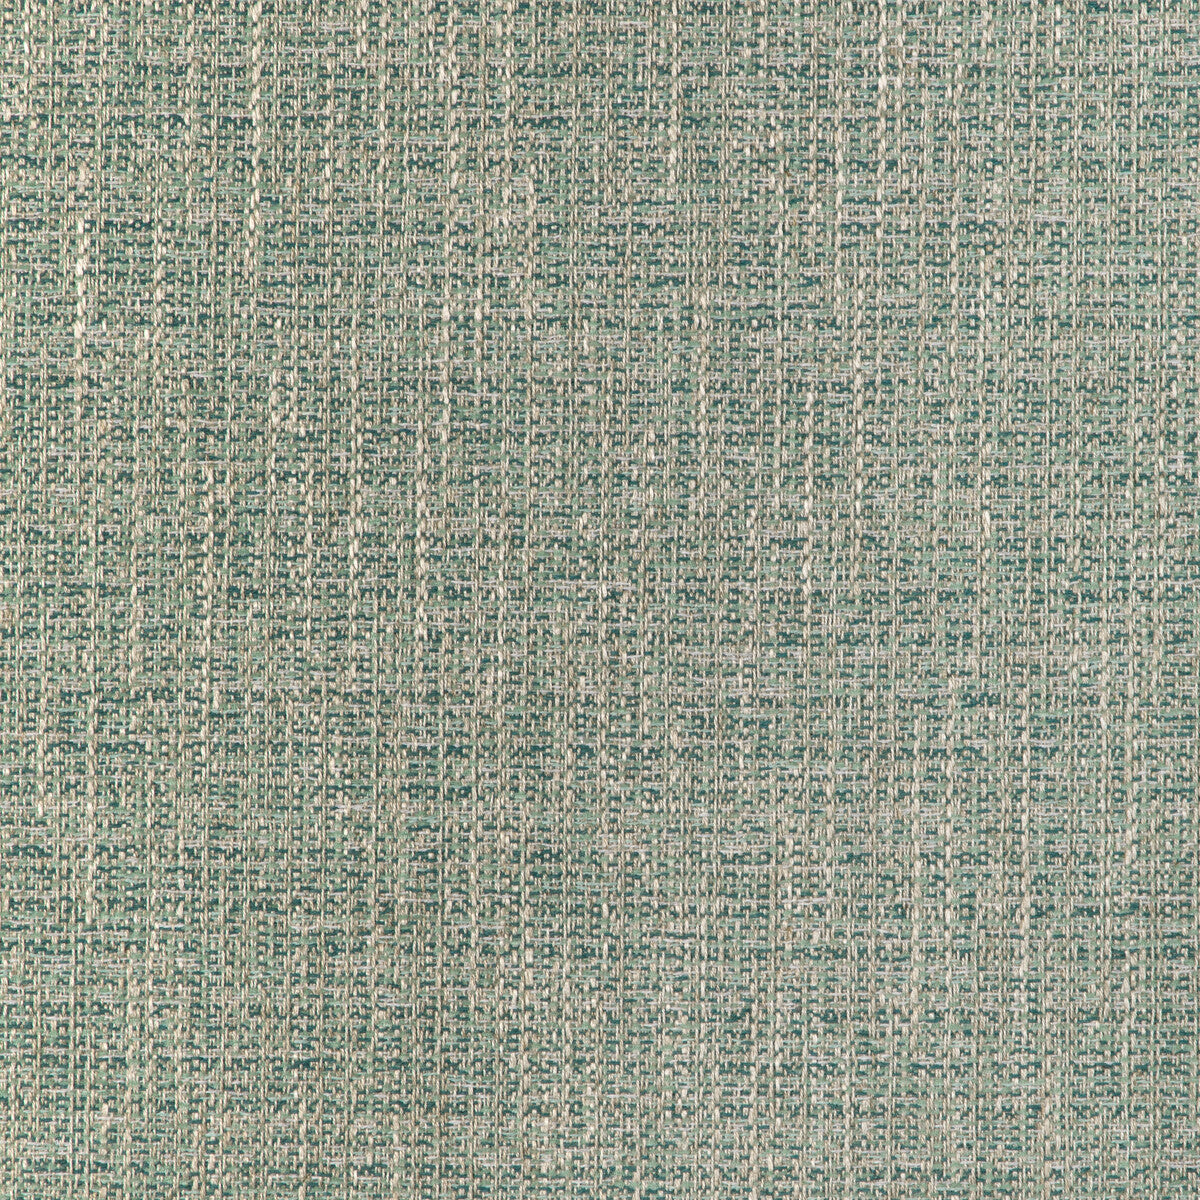 Kravet Design fabric in 35620-13 color - pattern 35620.13.0 - by Kravet Design in the Woven Colors collection